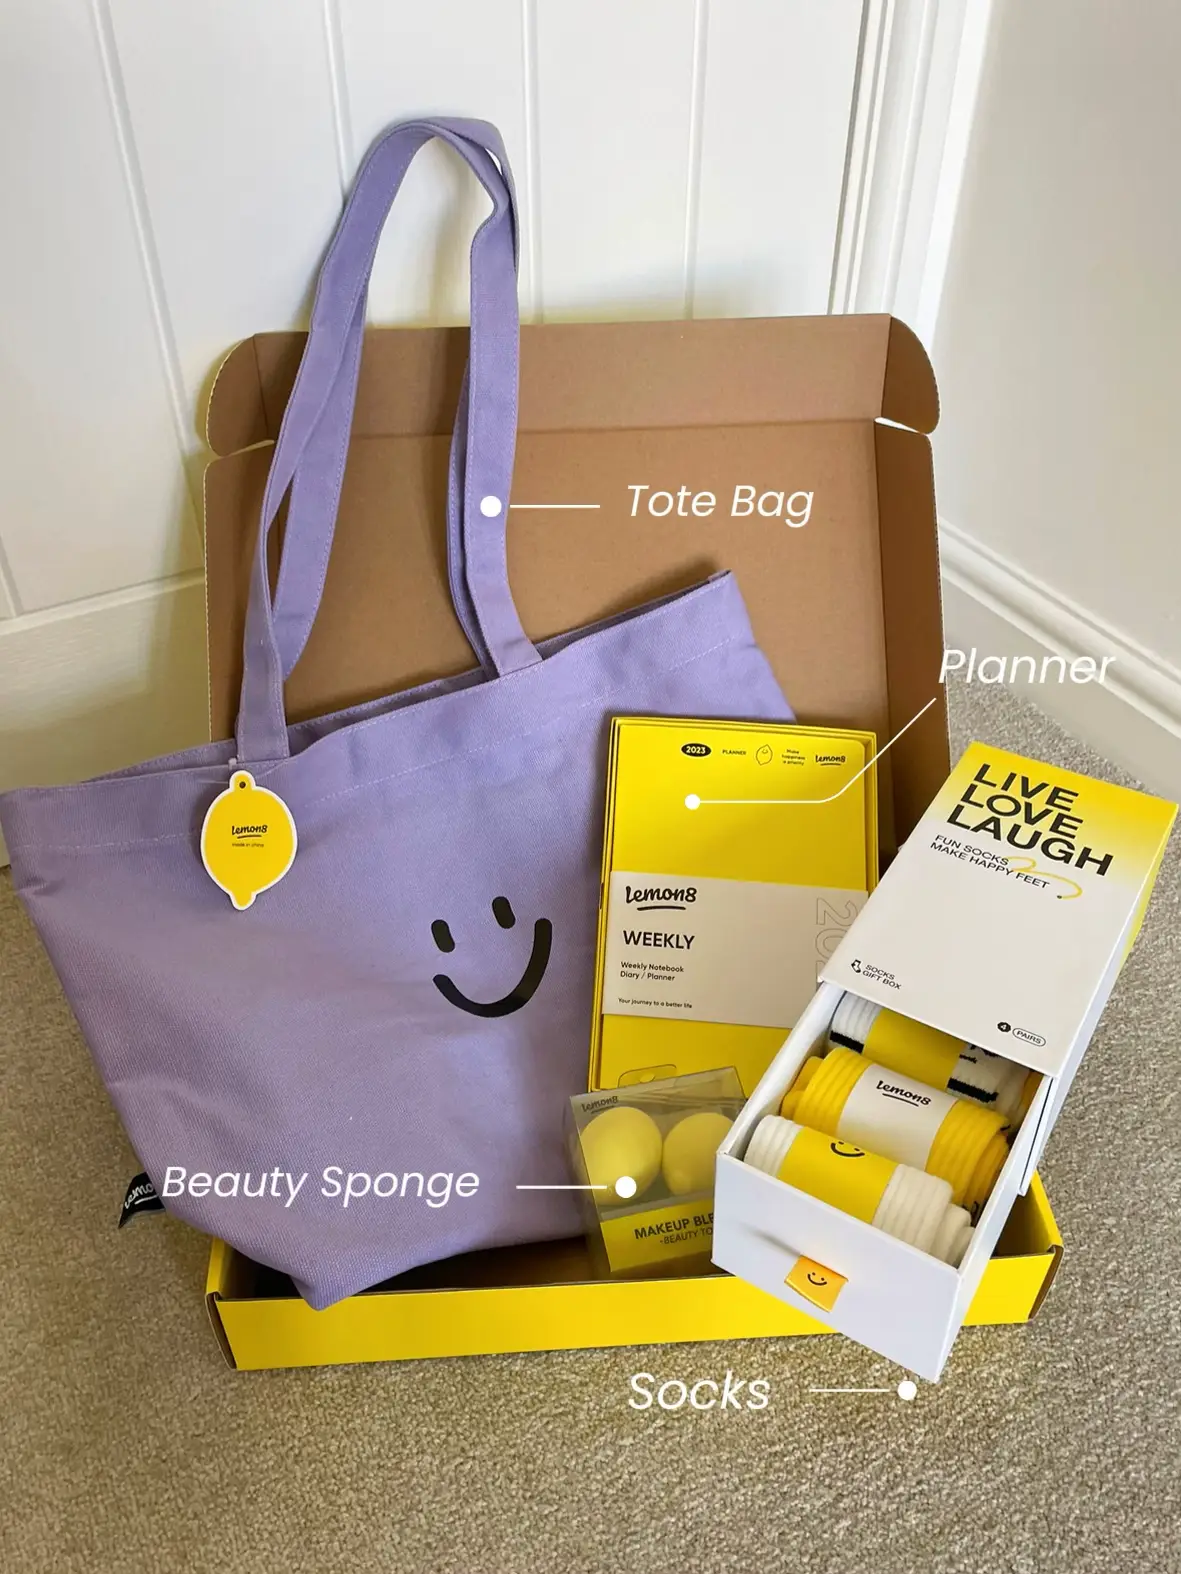  A box of makeup and a tote bag with a smiley face on it.